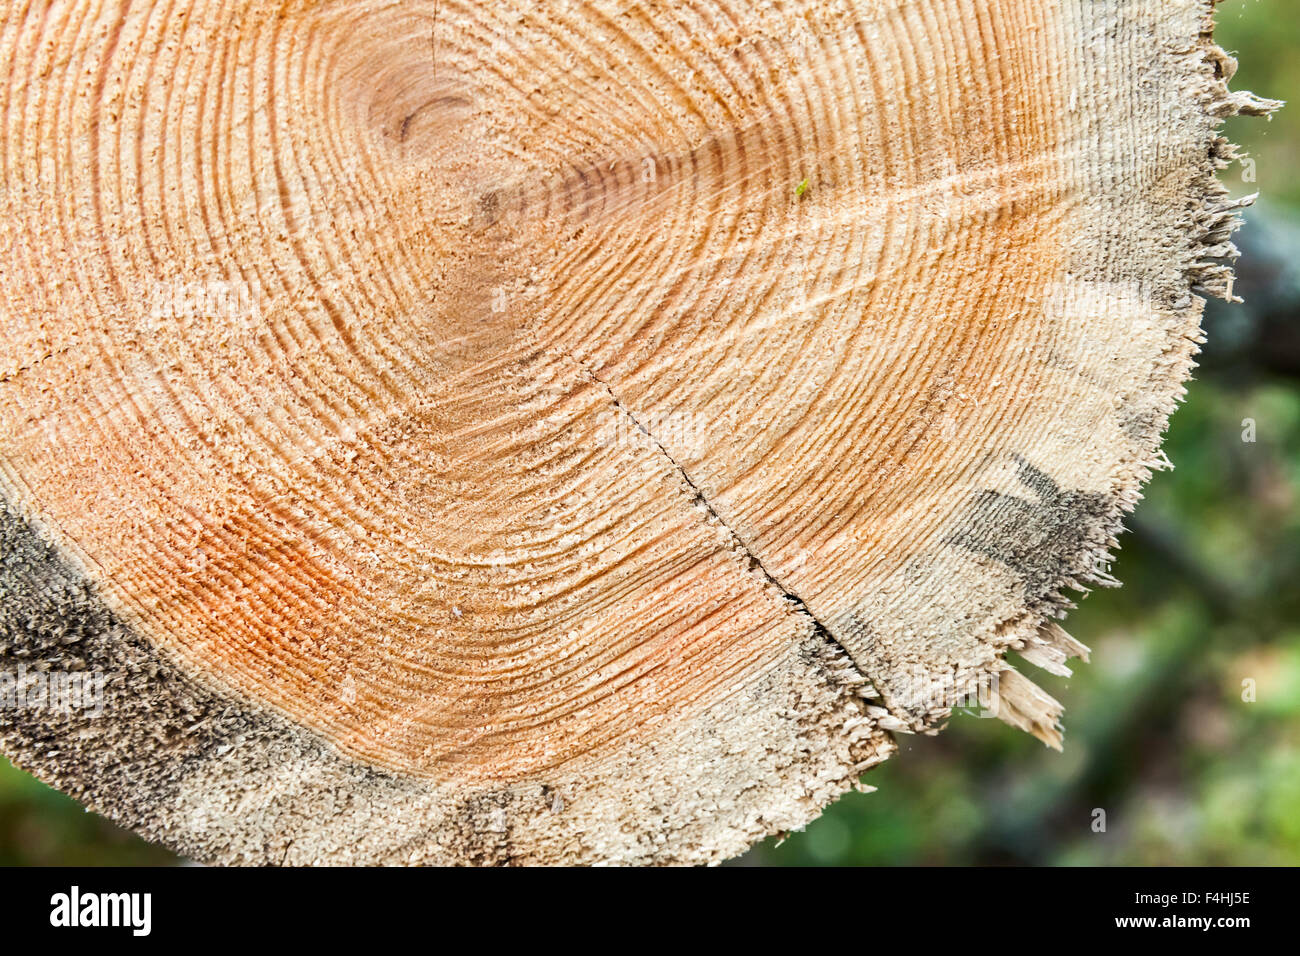 Fresh wooden log section closeup photo, background texture Stock Photo